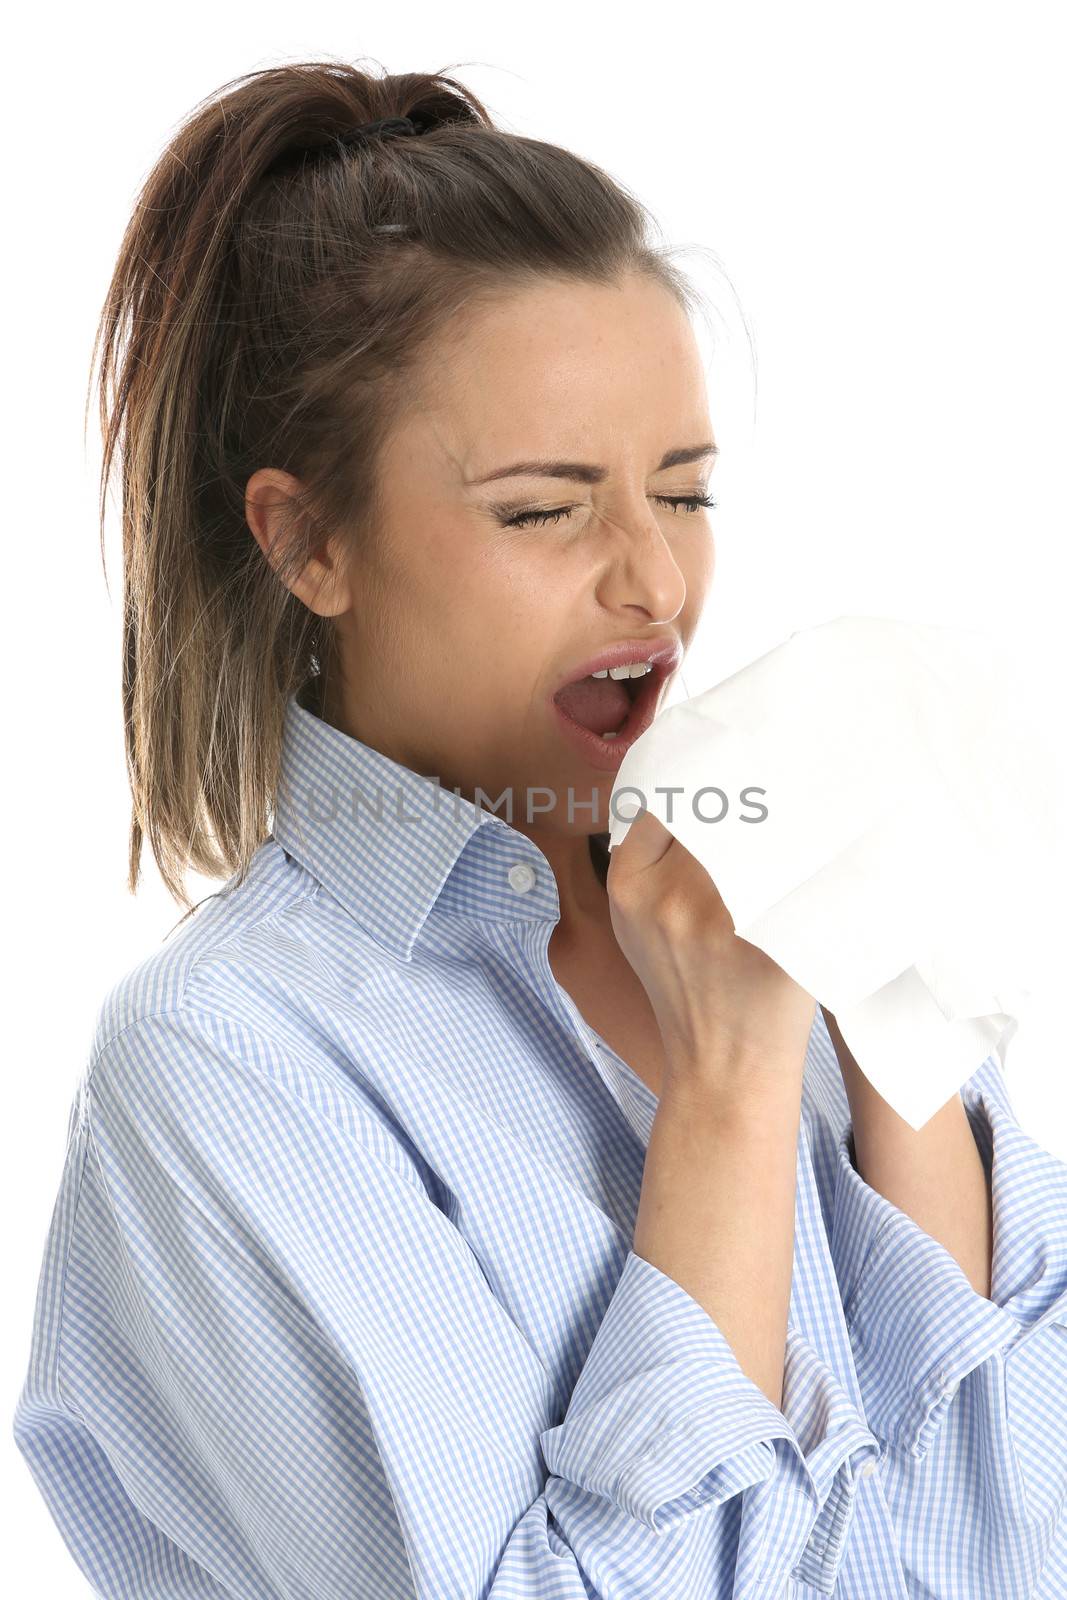 Model Released. Young Woman Sneezing by Whiteboxmedia